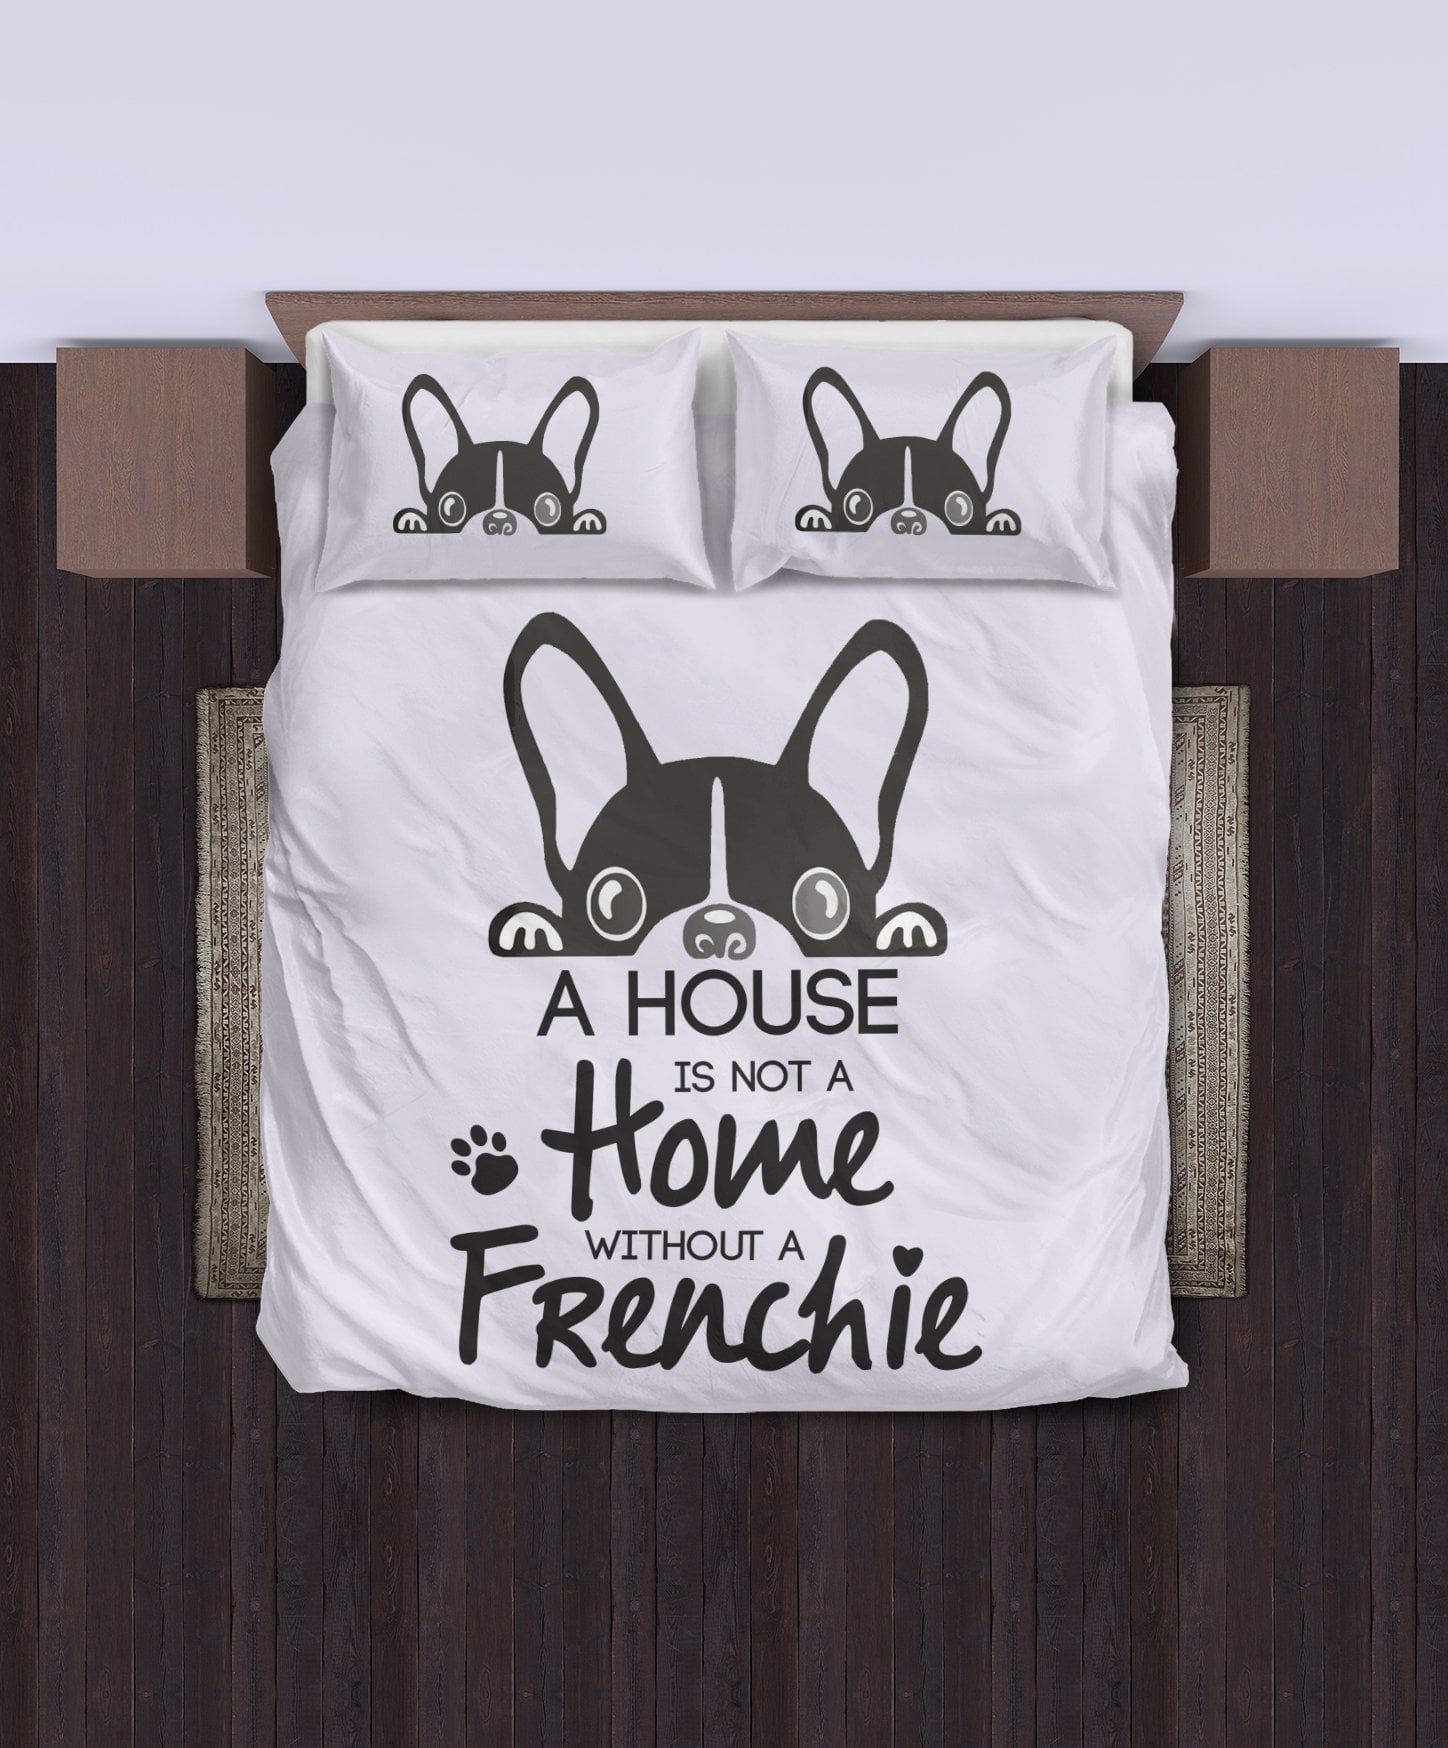 Bedding Set - Home without frenchie - Frenchie Bulldog Shop